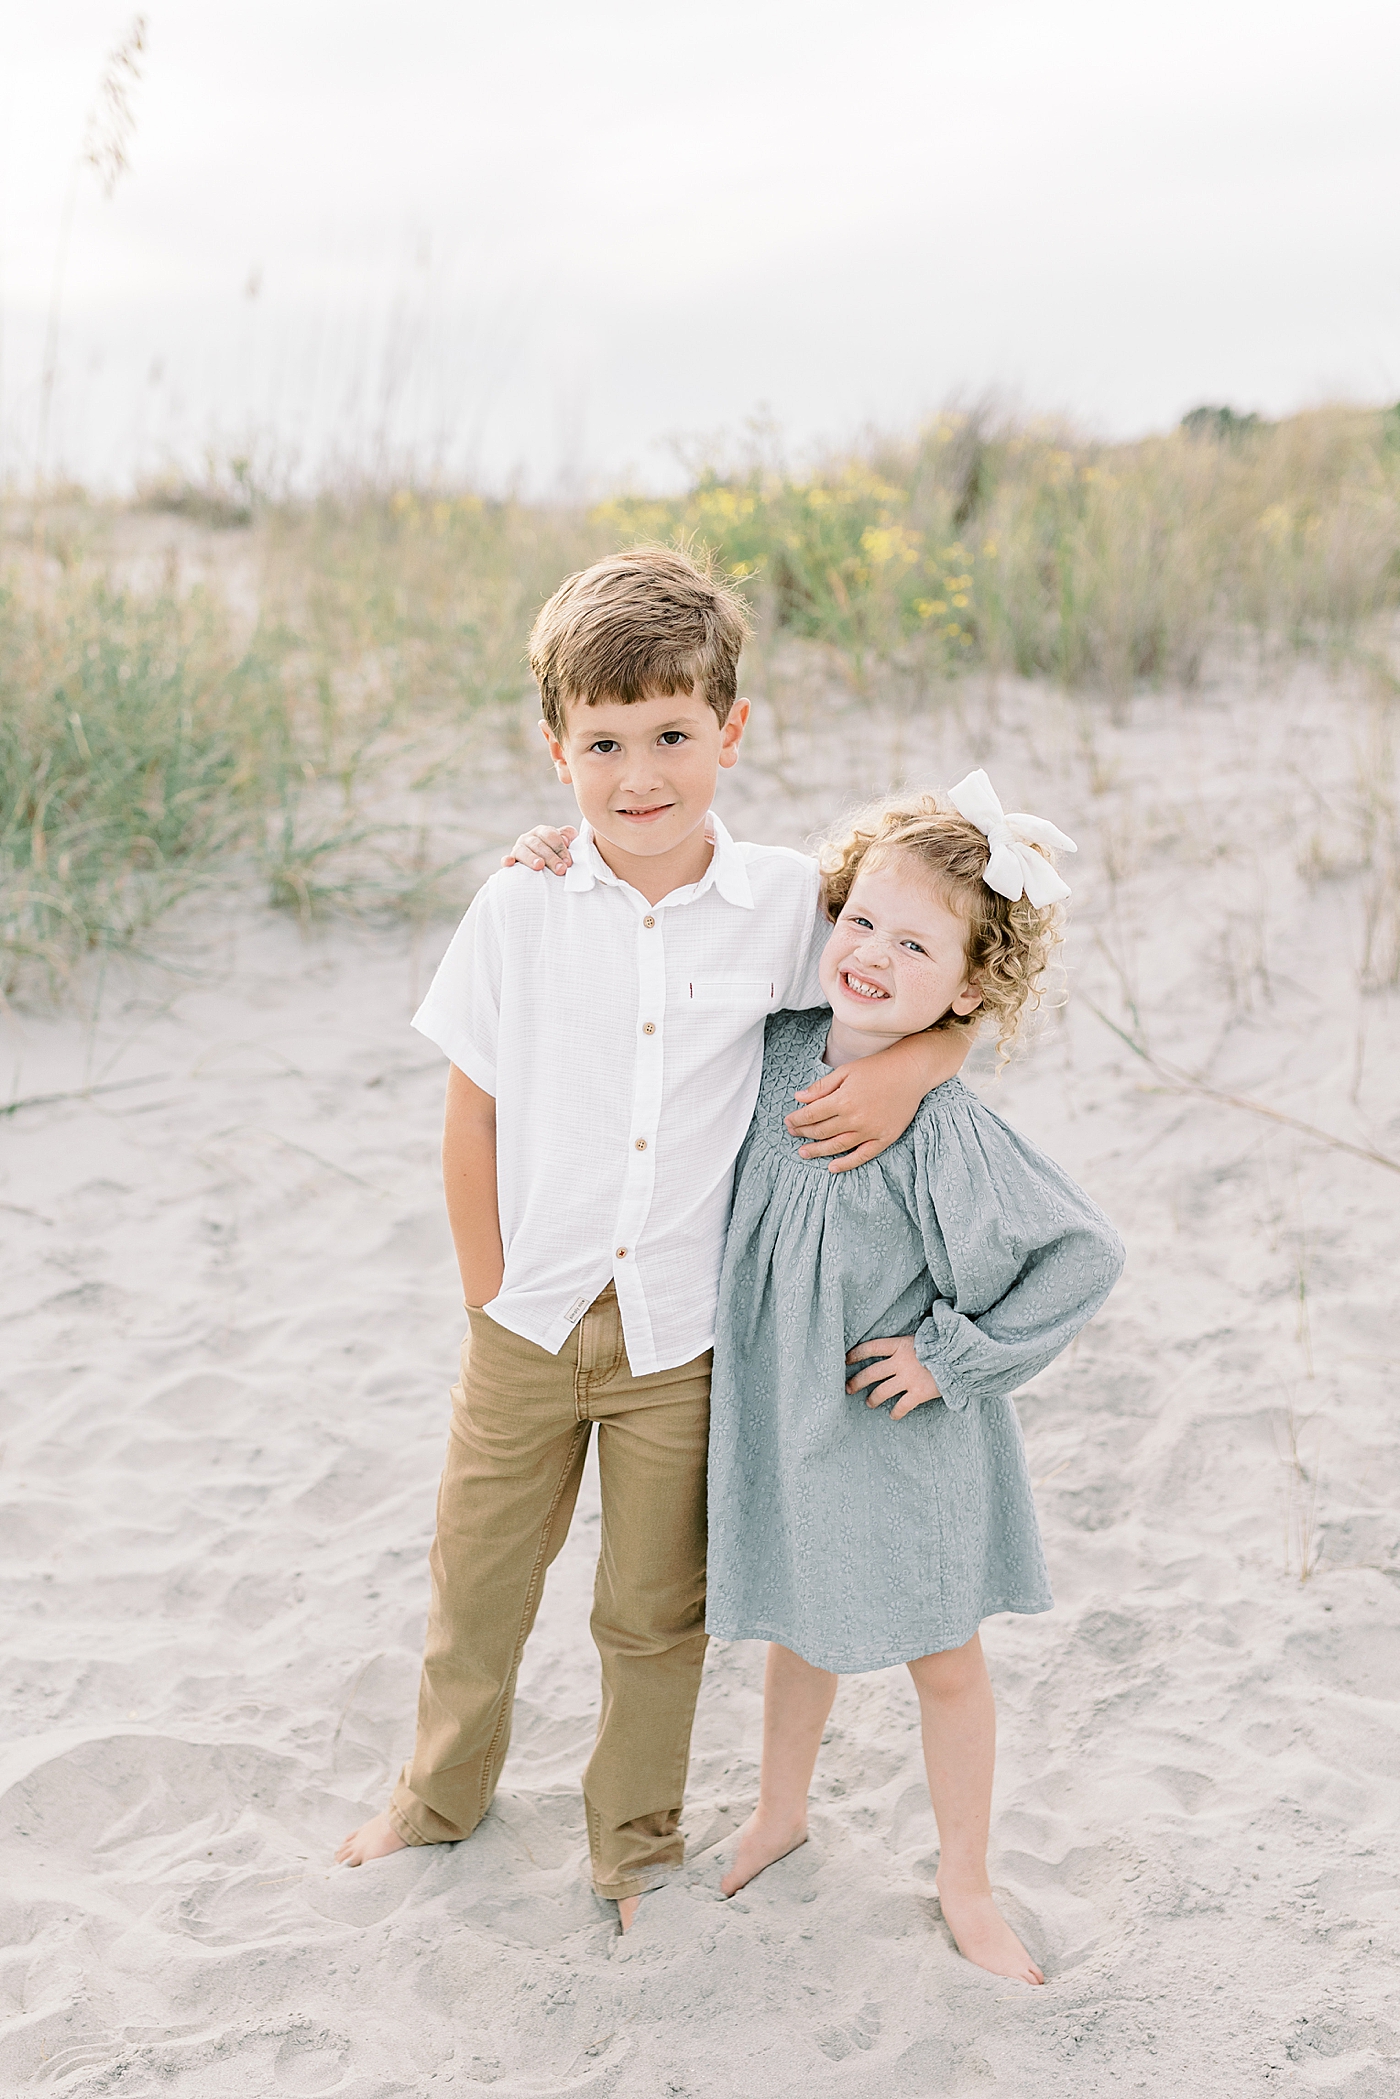 Brother and sister standing together on the beach | Photo by Caitlyn Motycka Photography